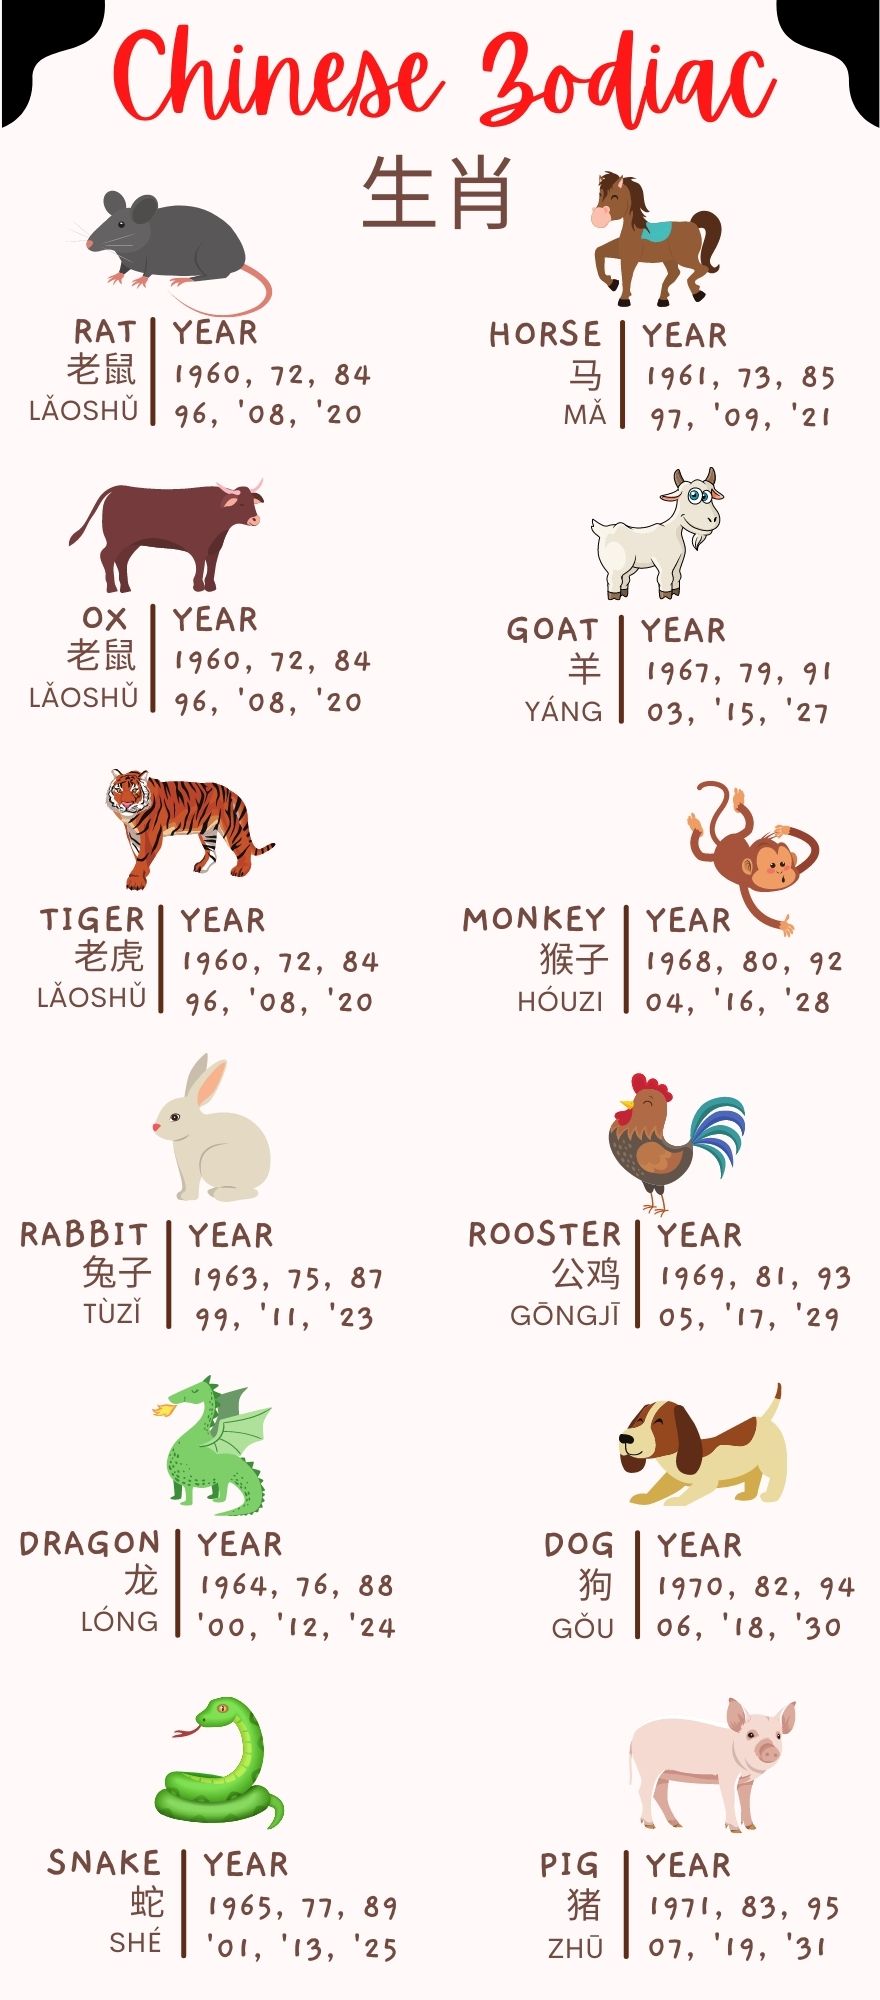 200+ Animals in Mandarin Chinese | The Ultimate List!